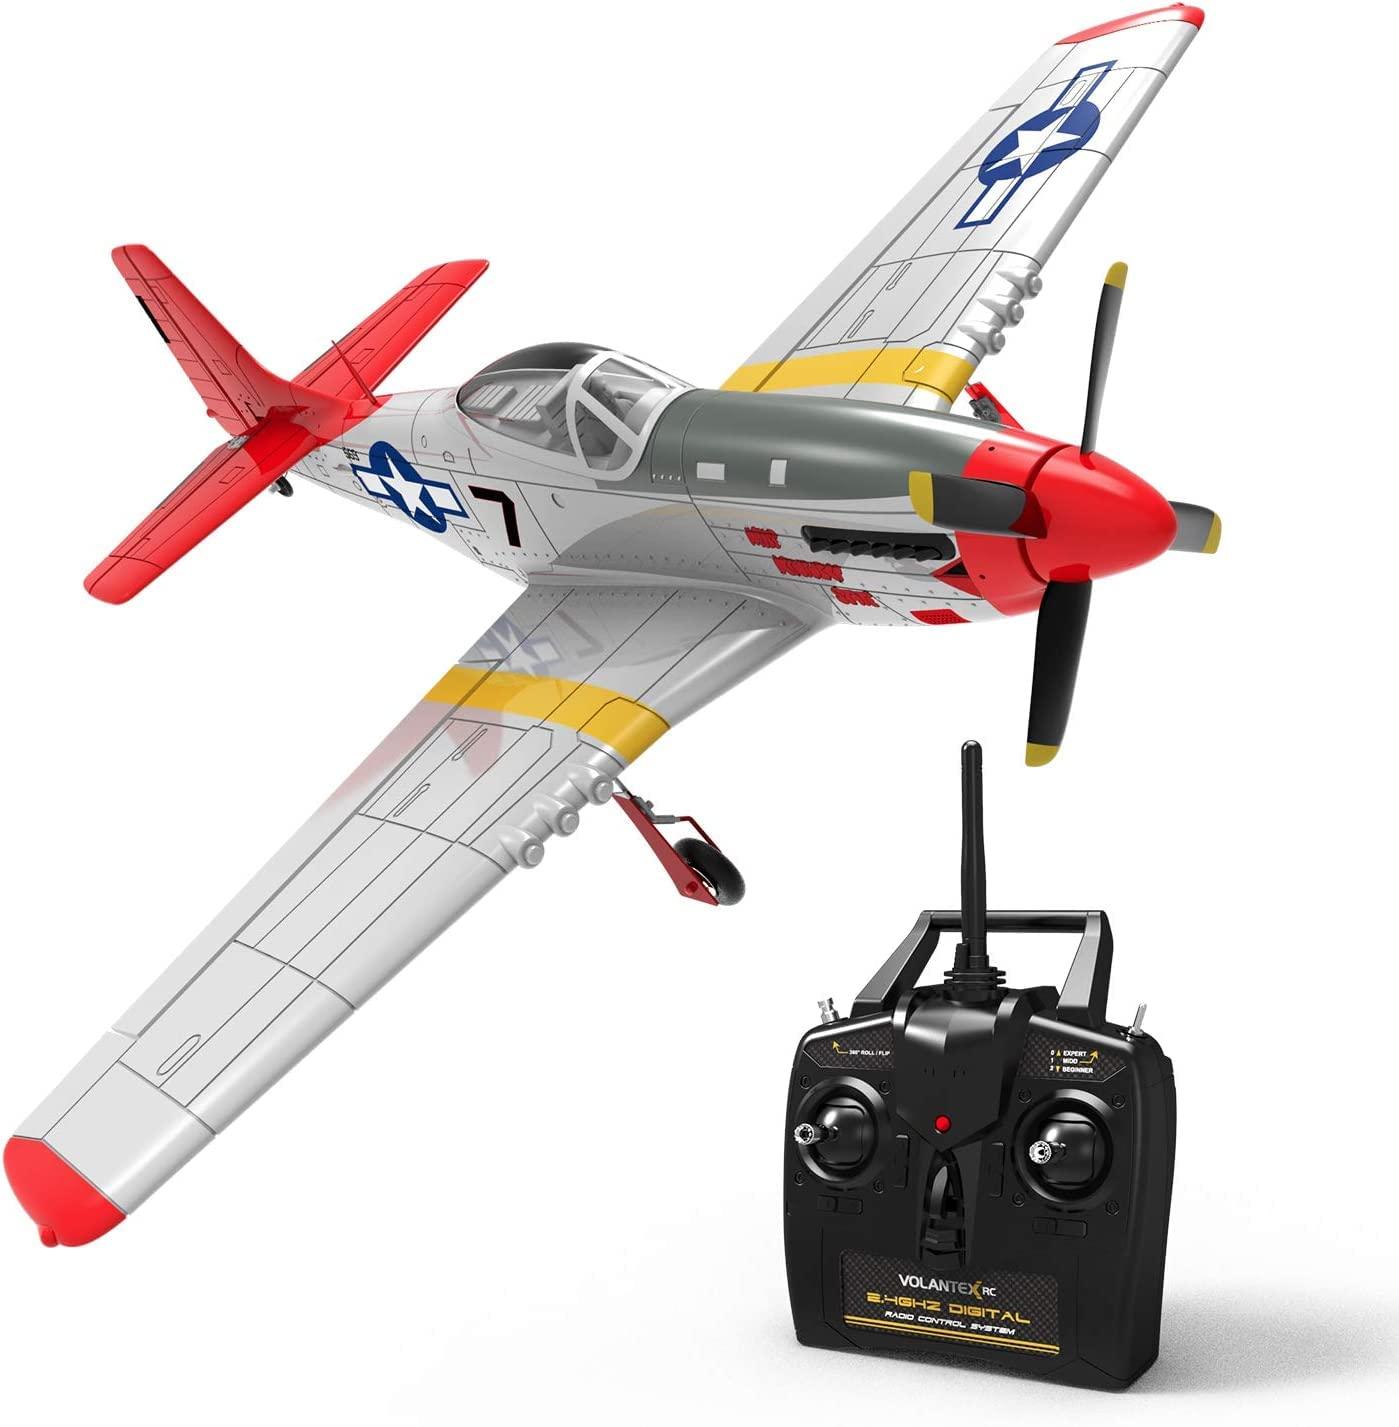 Volantex Rc P51 Mustang:  The Ultimate RC Experience